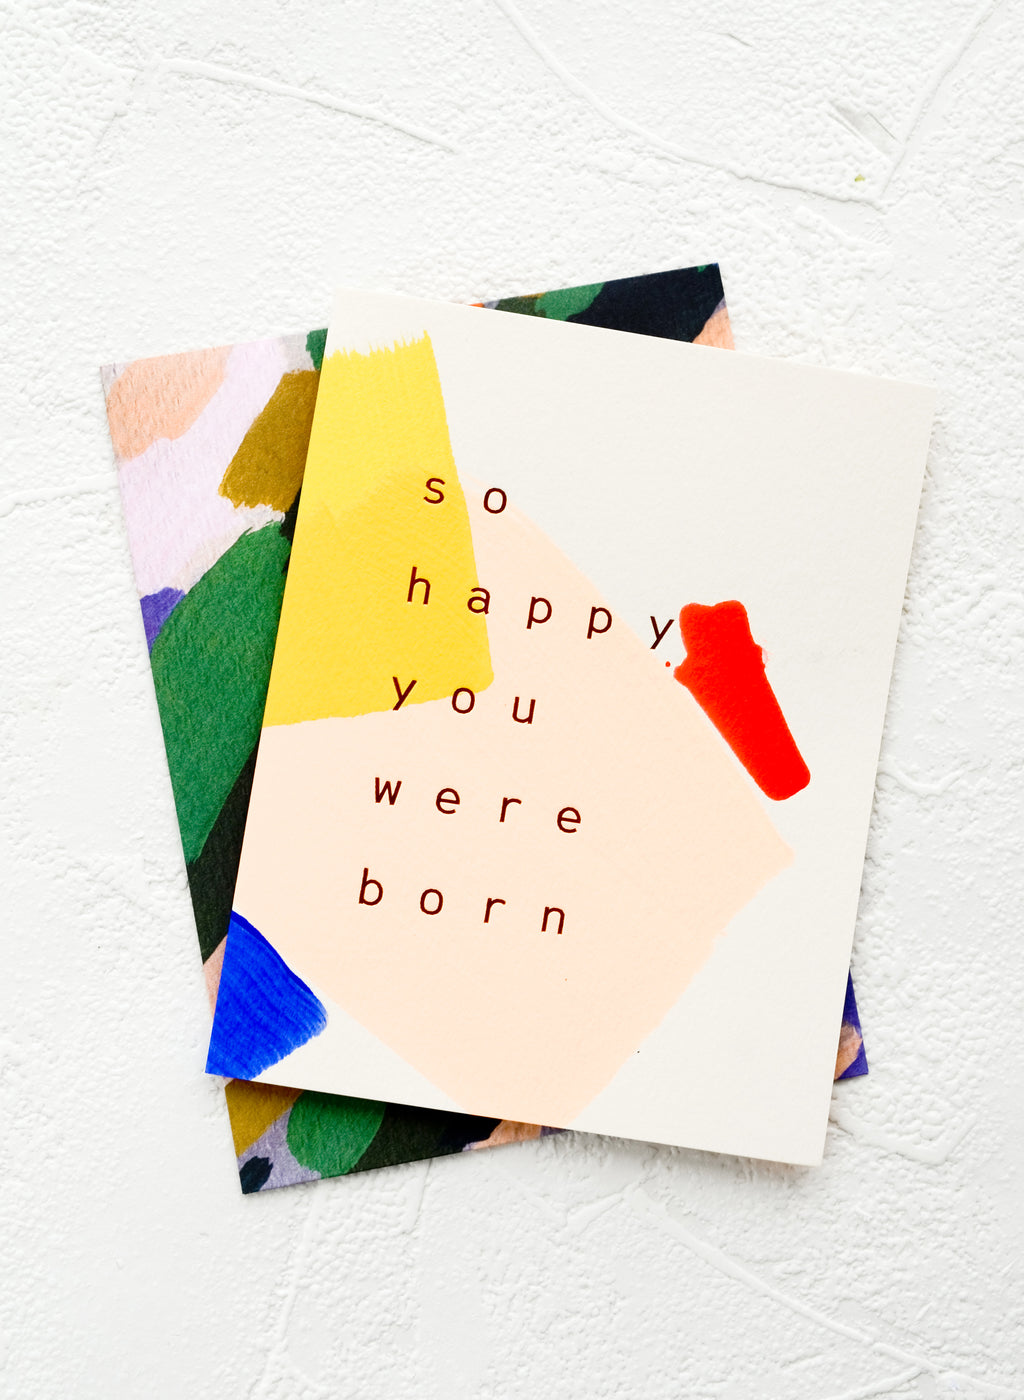 2: A greeting card with hand-painted geometric shapes and text reading "So happy you were born"